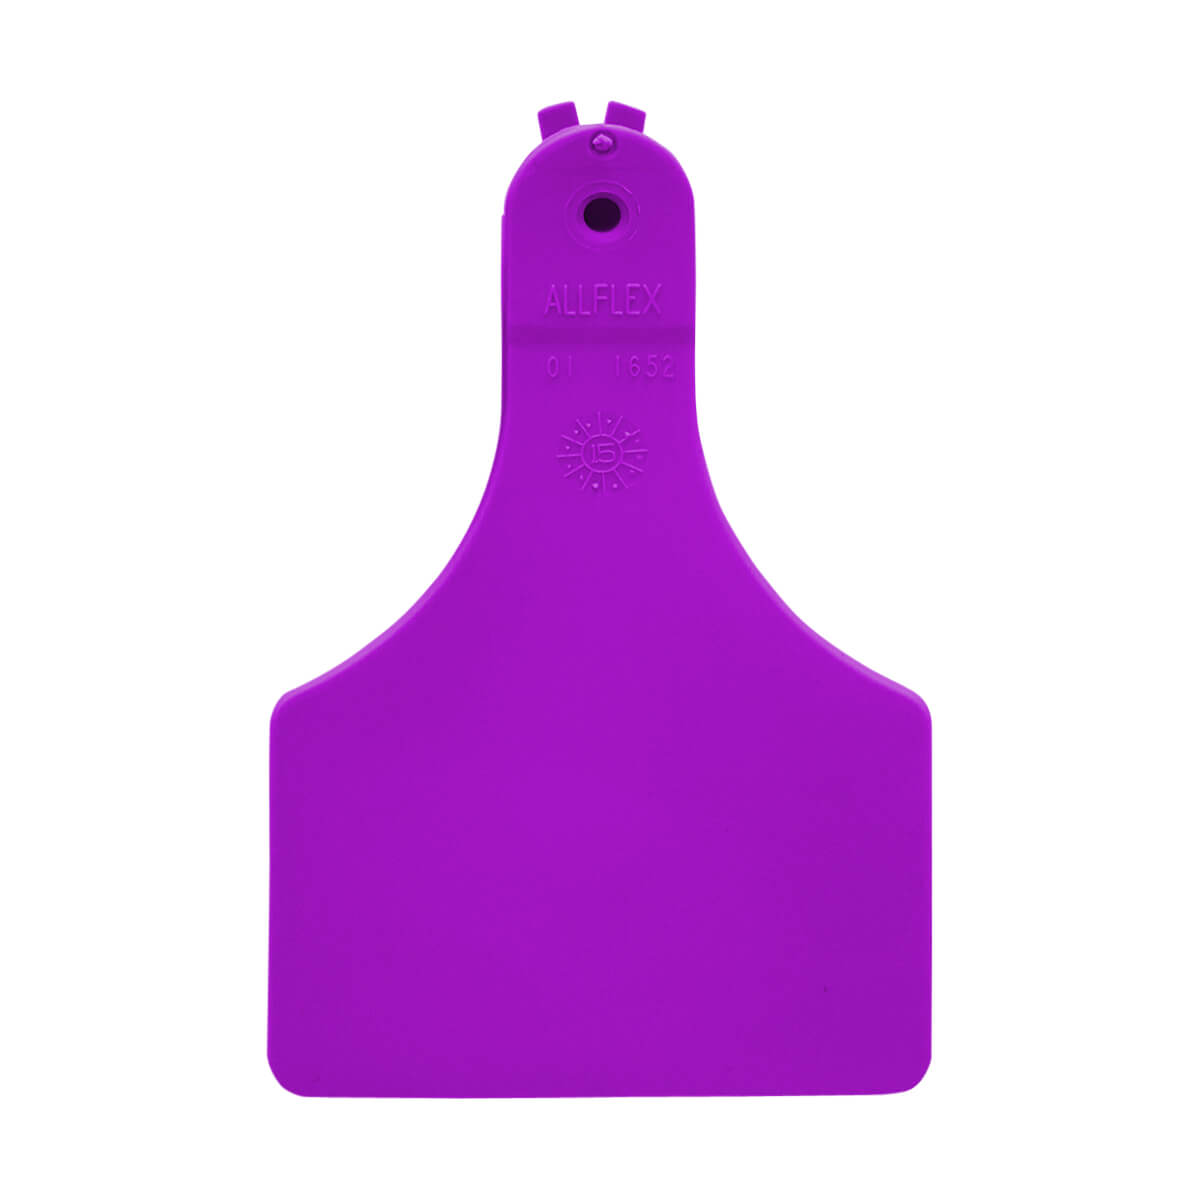 ATag One-Piece Calf Tag - Purple - 25 Pack